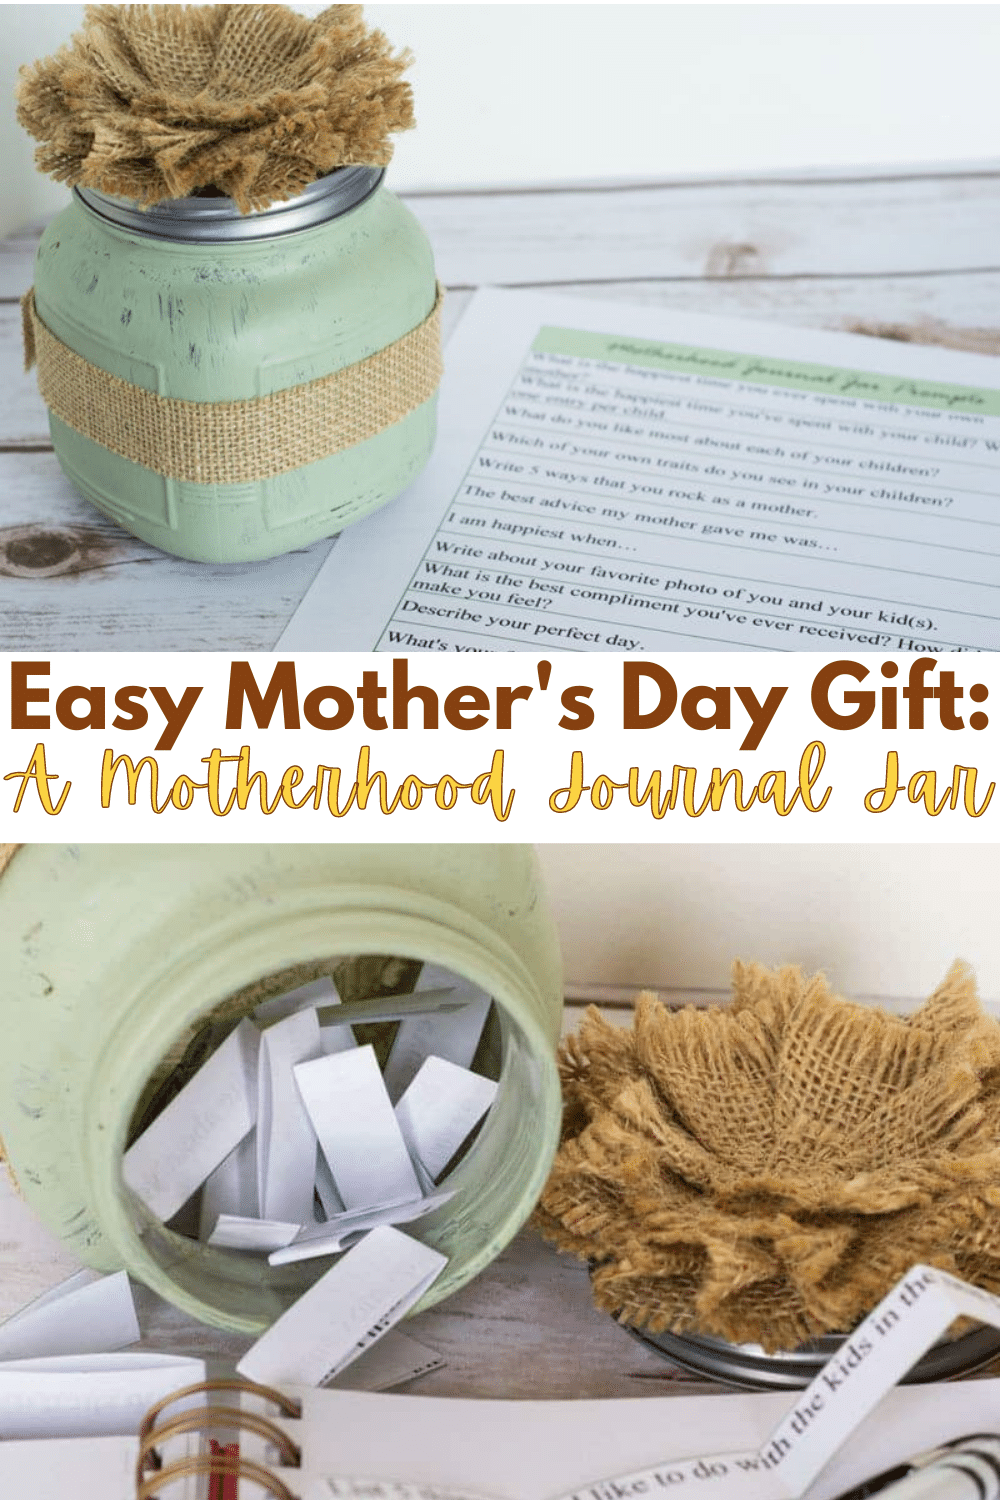 This motherhood journal jar is such an easy DIY gift for Mother's Day! The printable prompts provide lots of inspiration for mom's journaling which then becomes a treasured gift for her children. #motherhood #mothersday #mothersdaygift #diy via @wondermomwannab